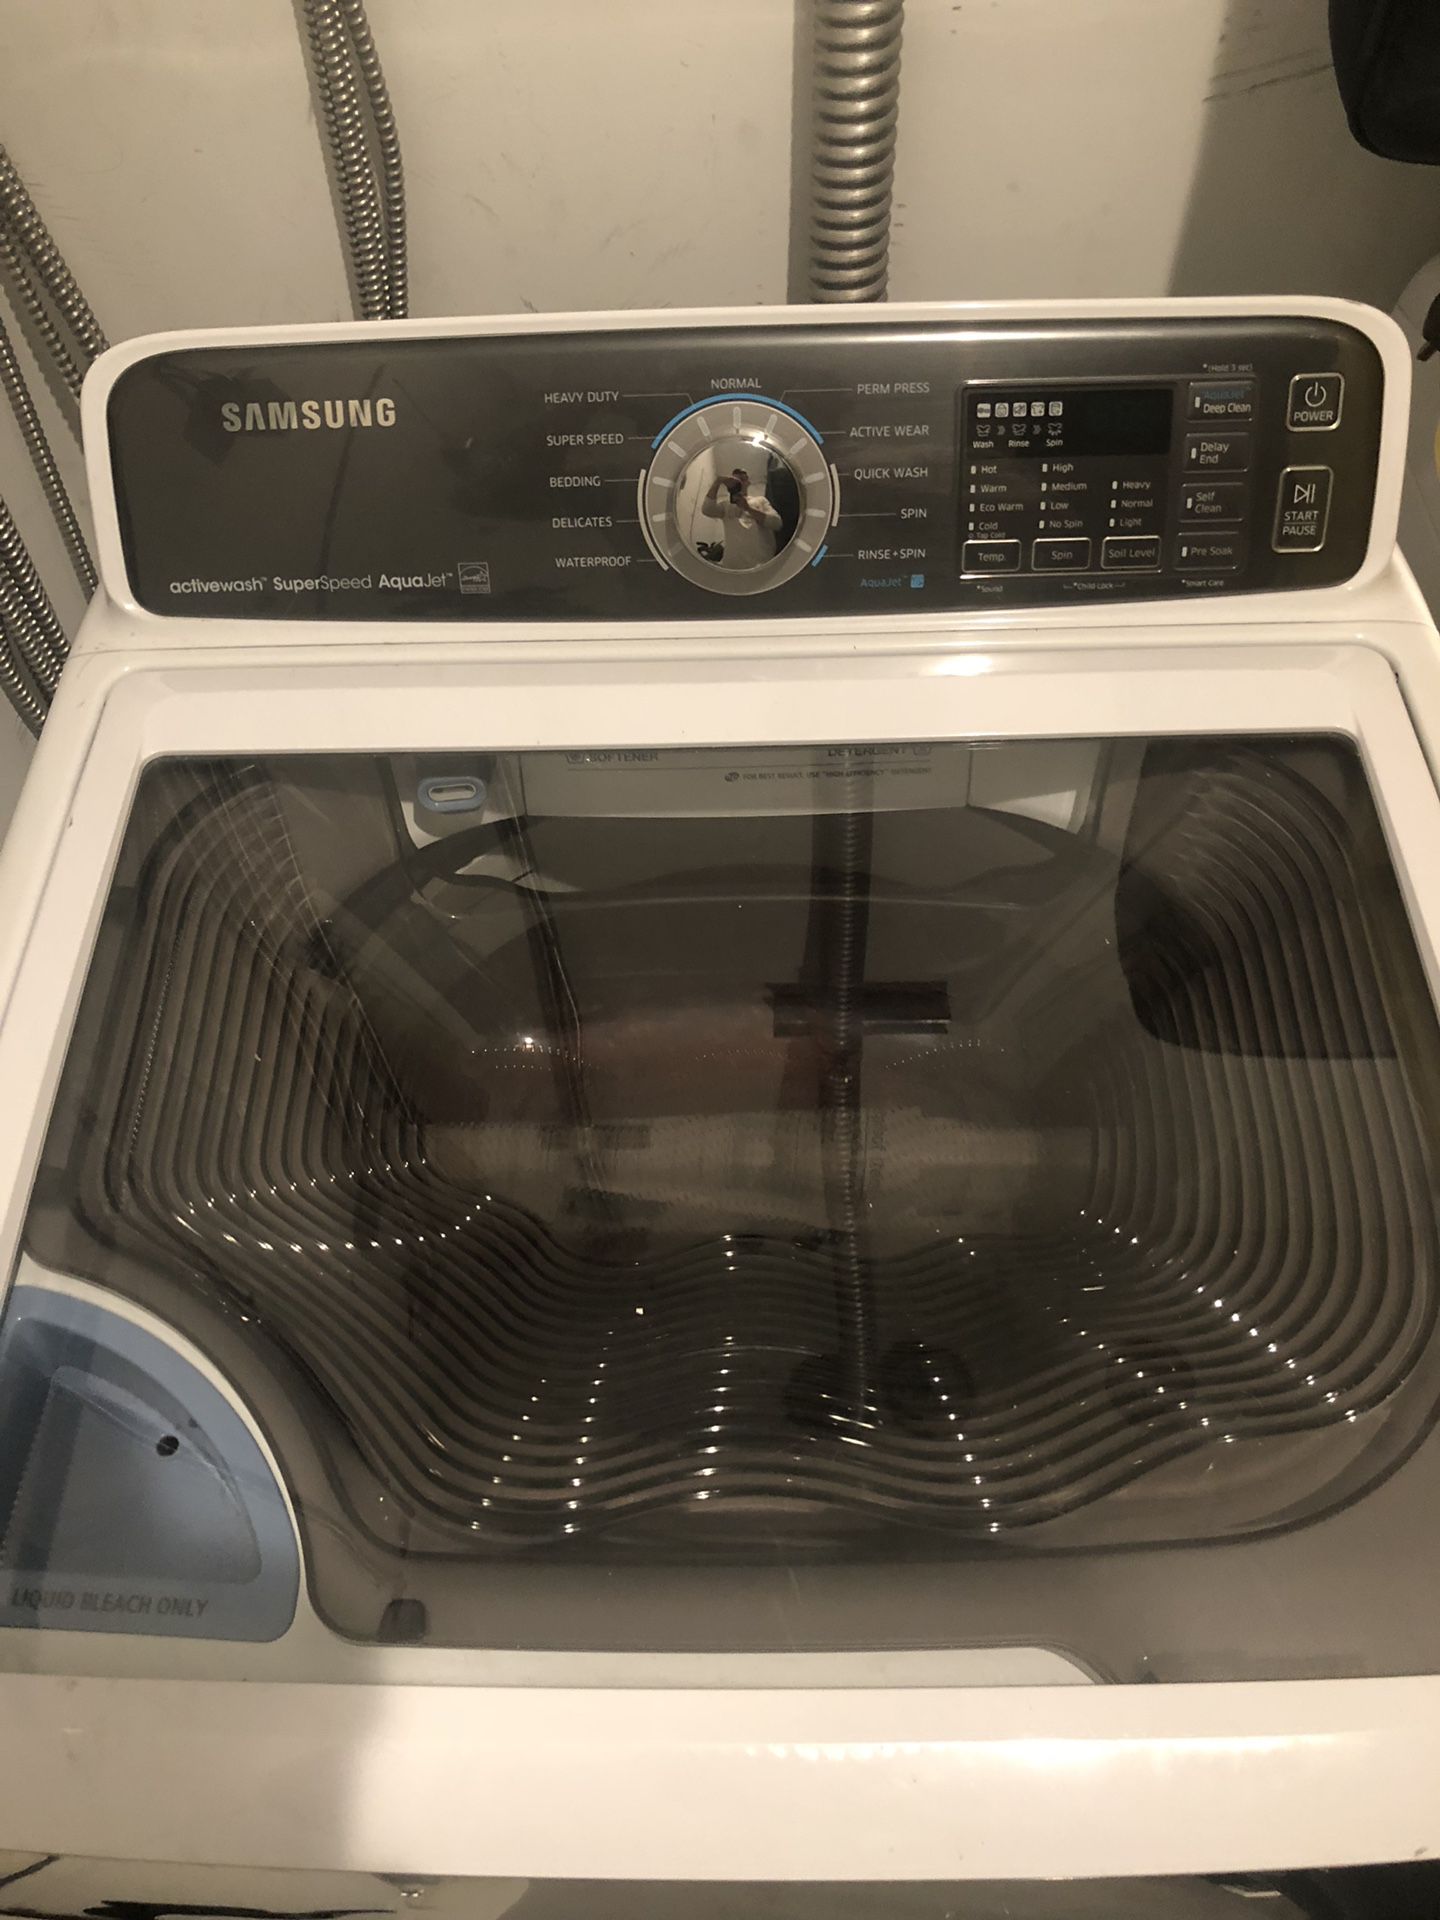 Samsung high performance washer/dryer for sale!